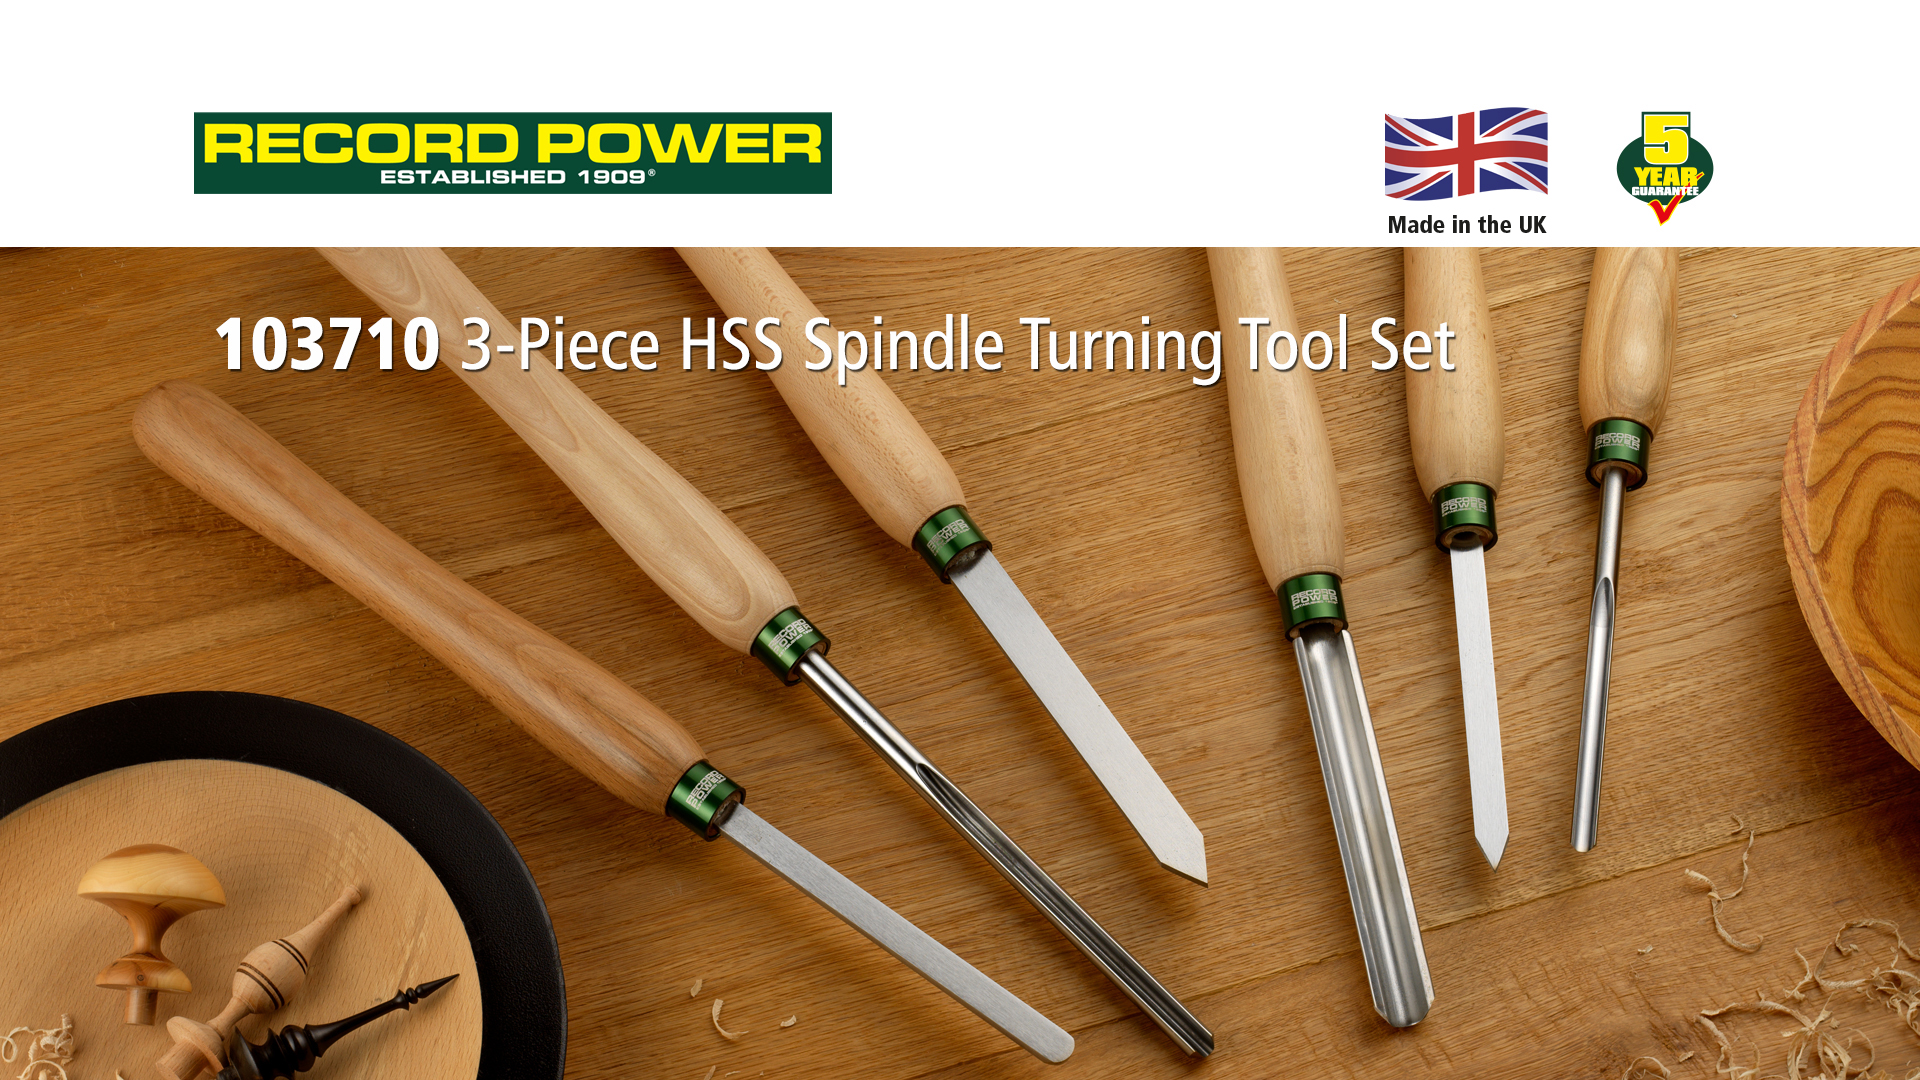 Record Power 103710 3-Piece HSS Spindle Turning Tool Set